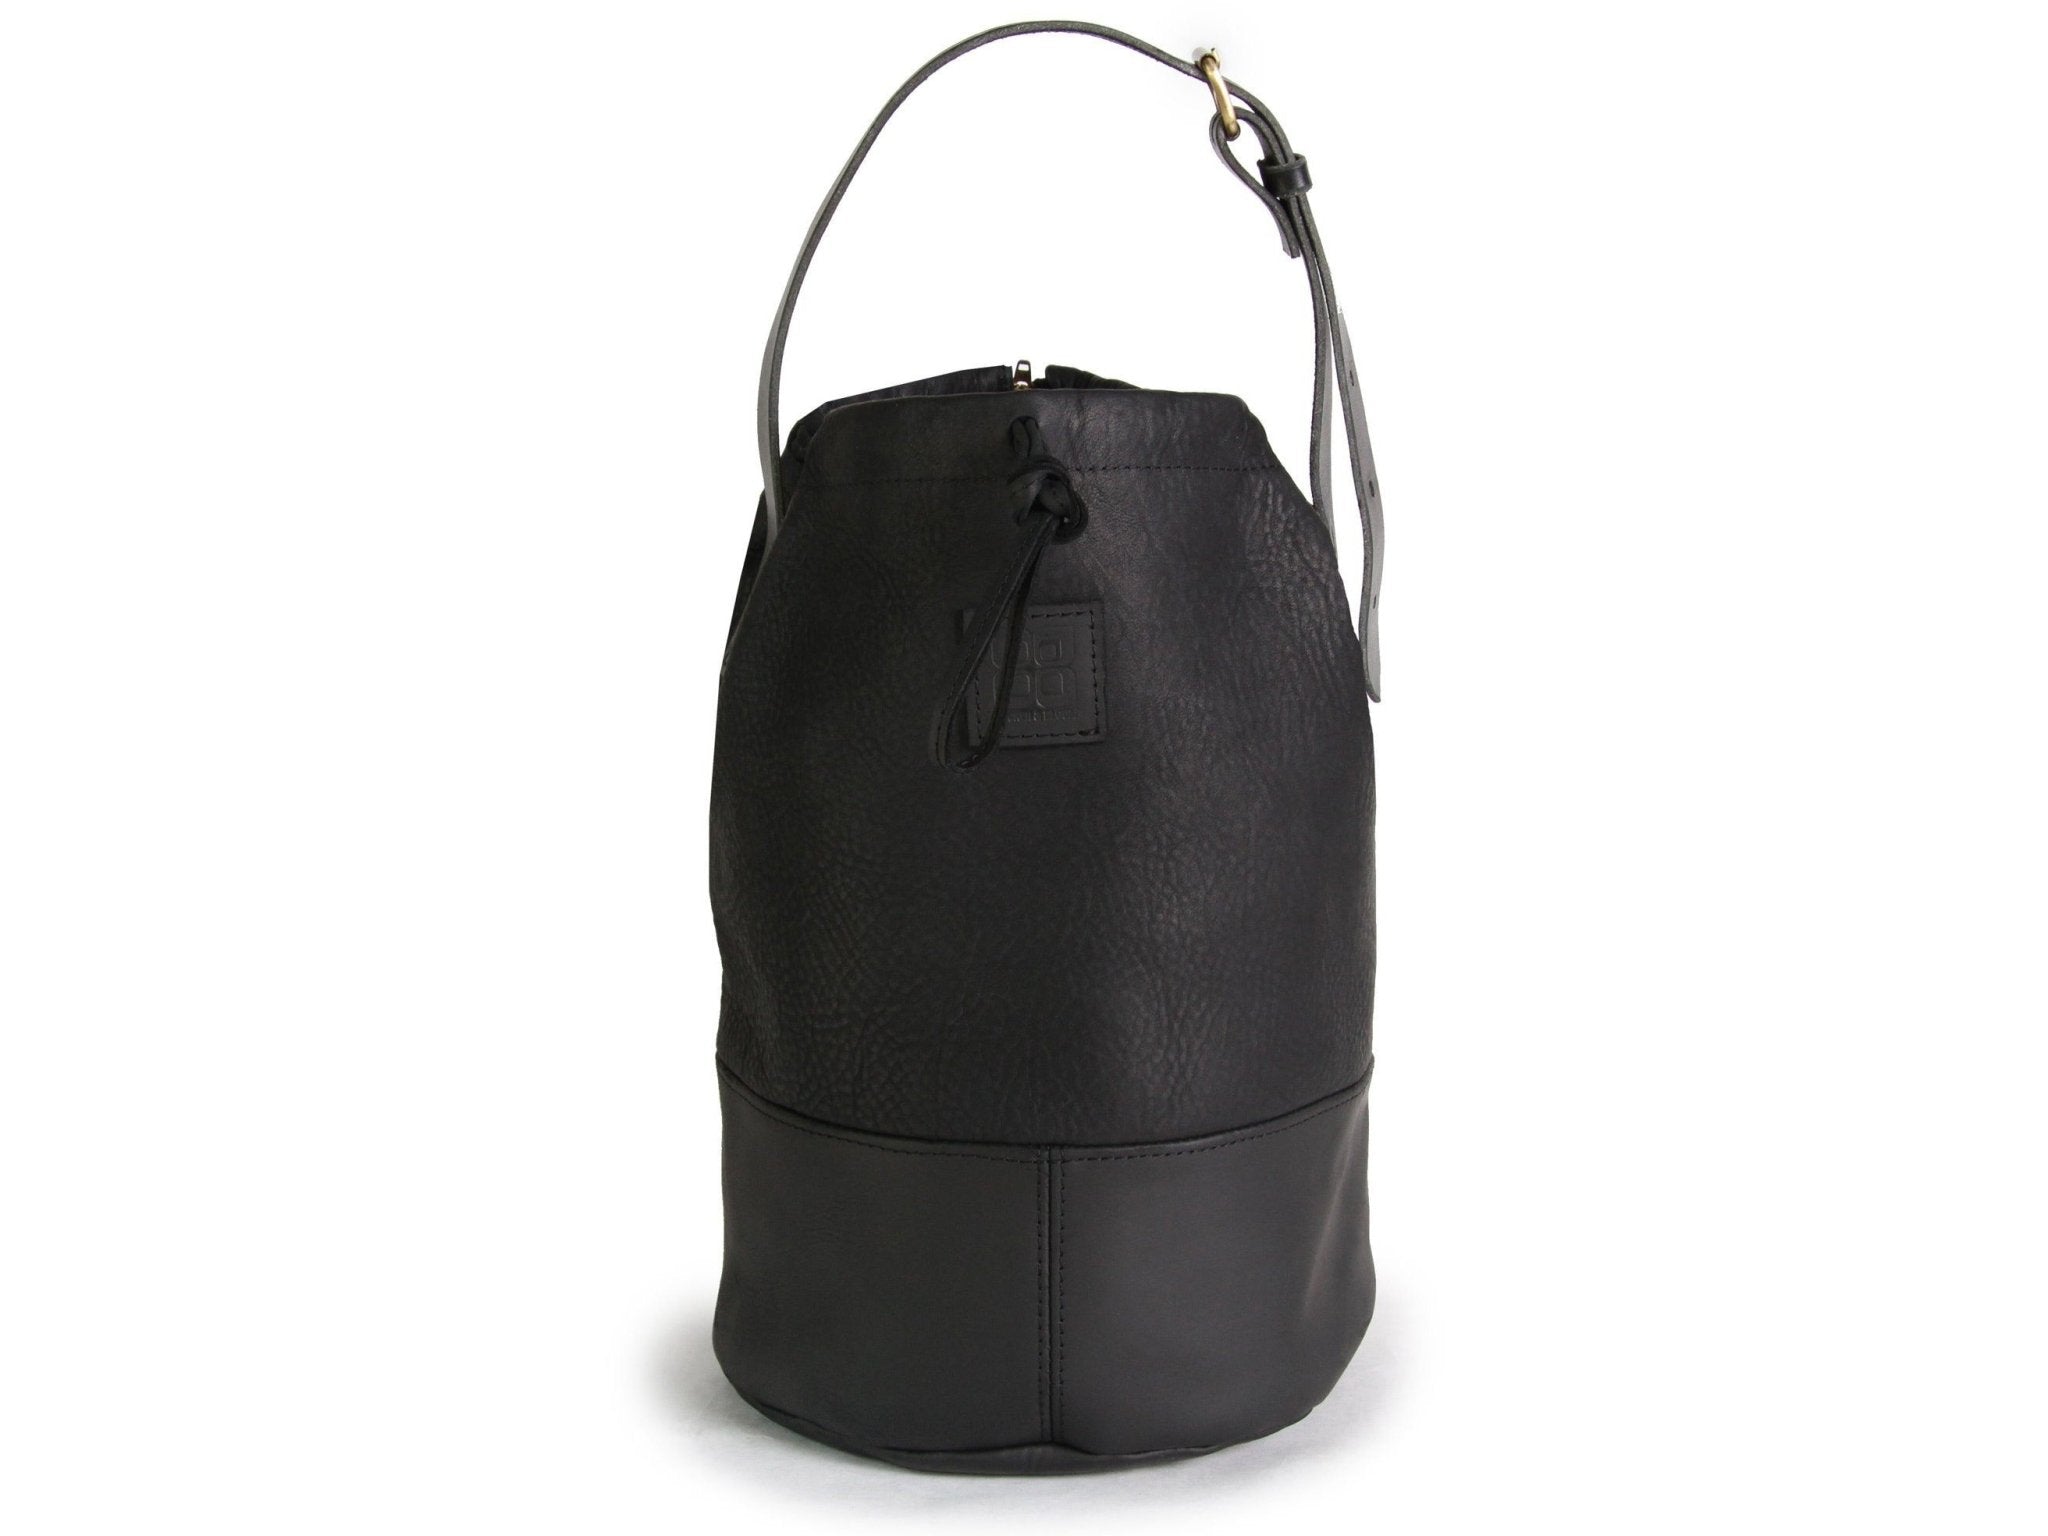 Made Easy Tote Black